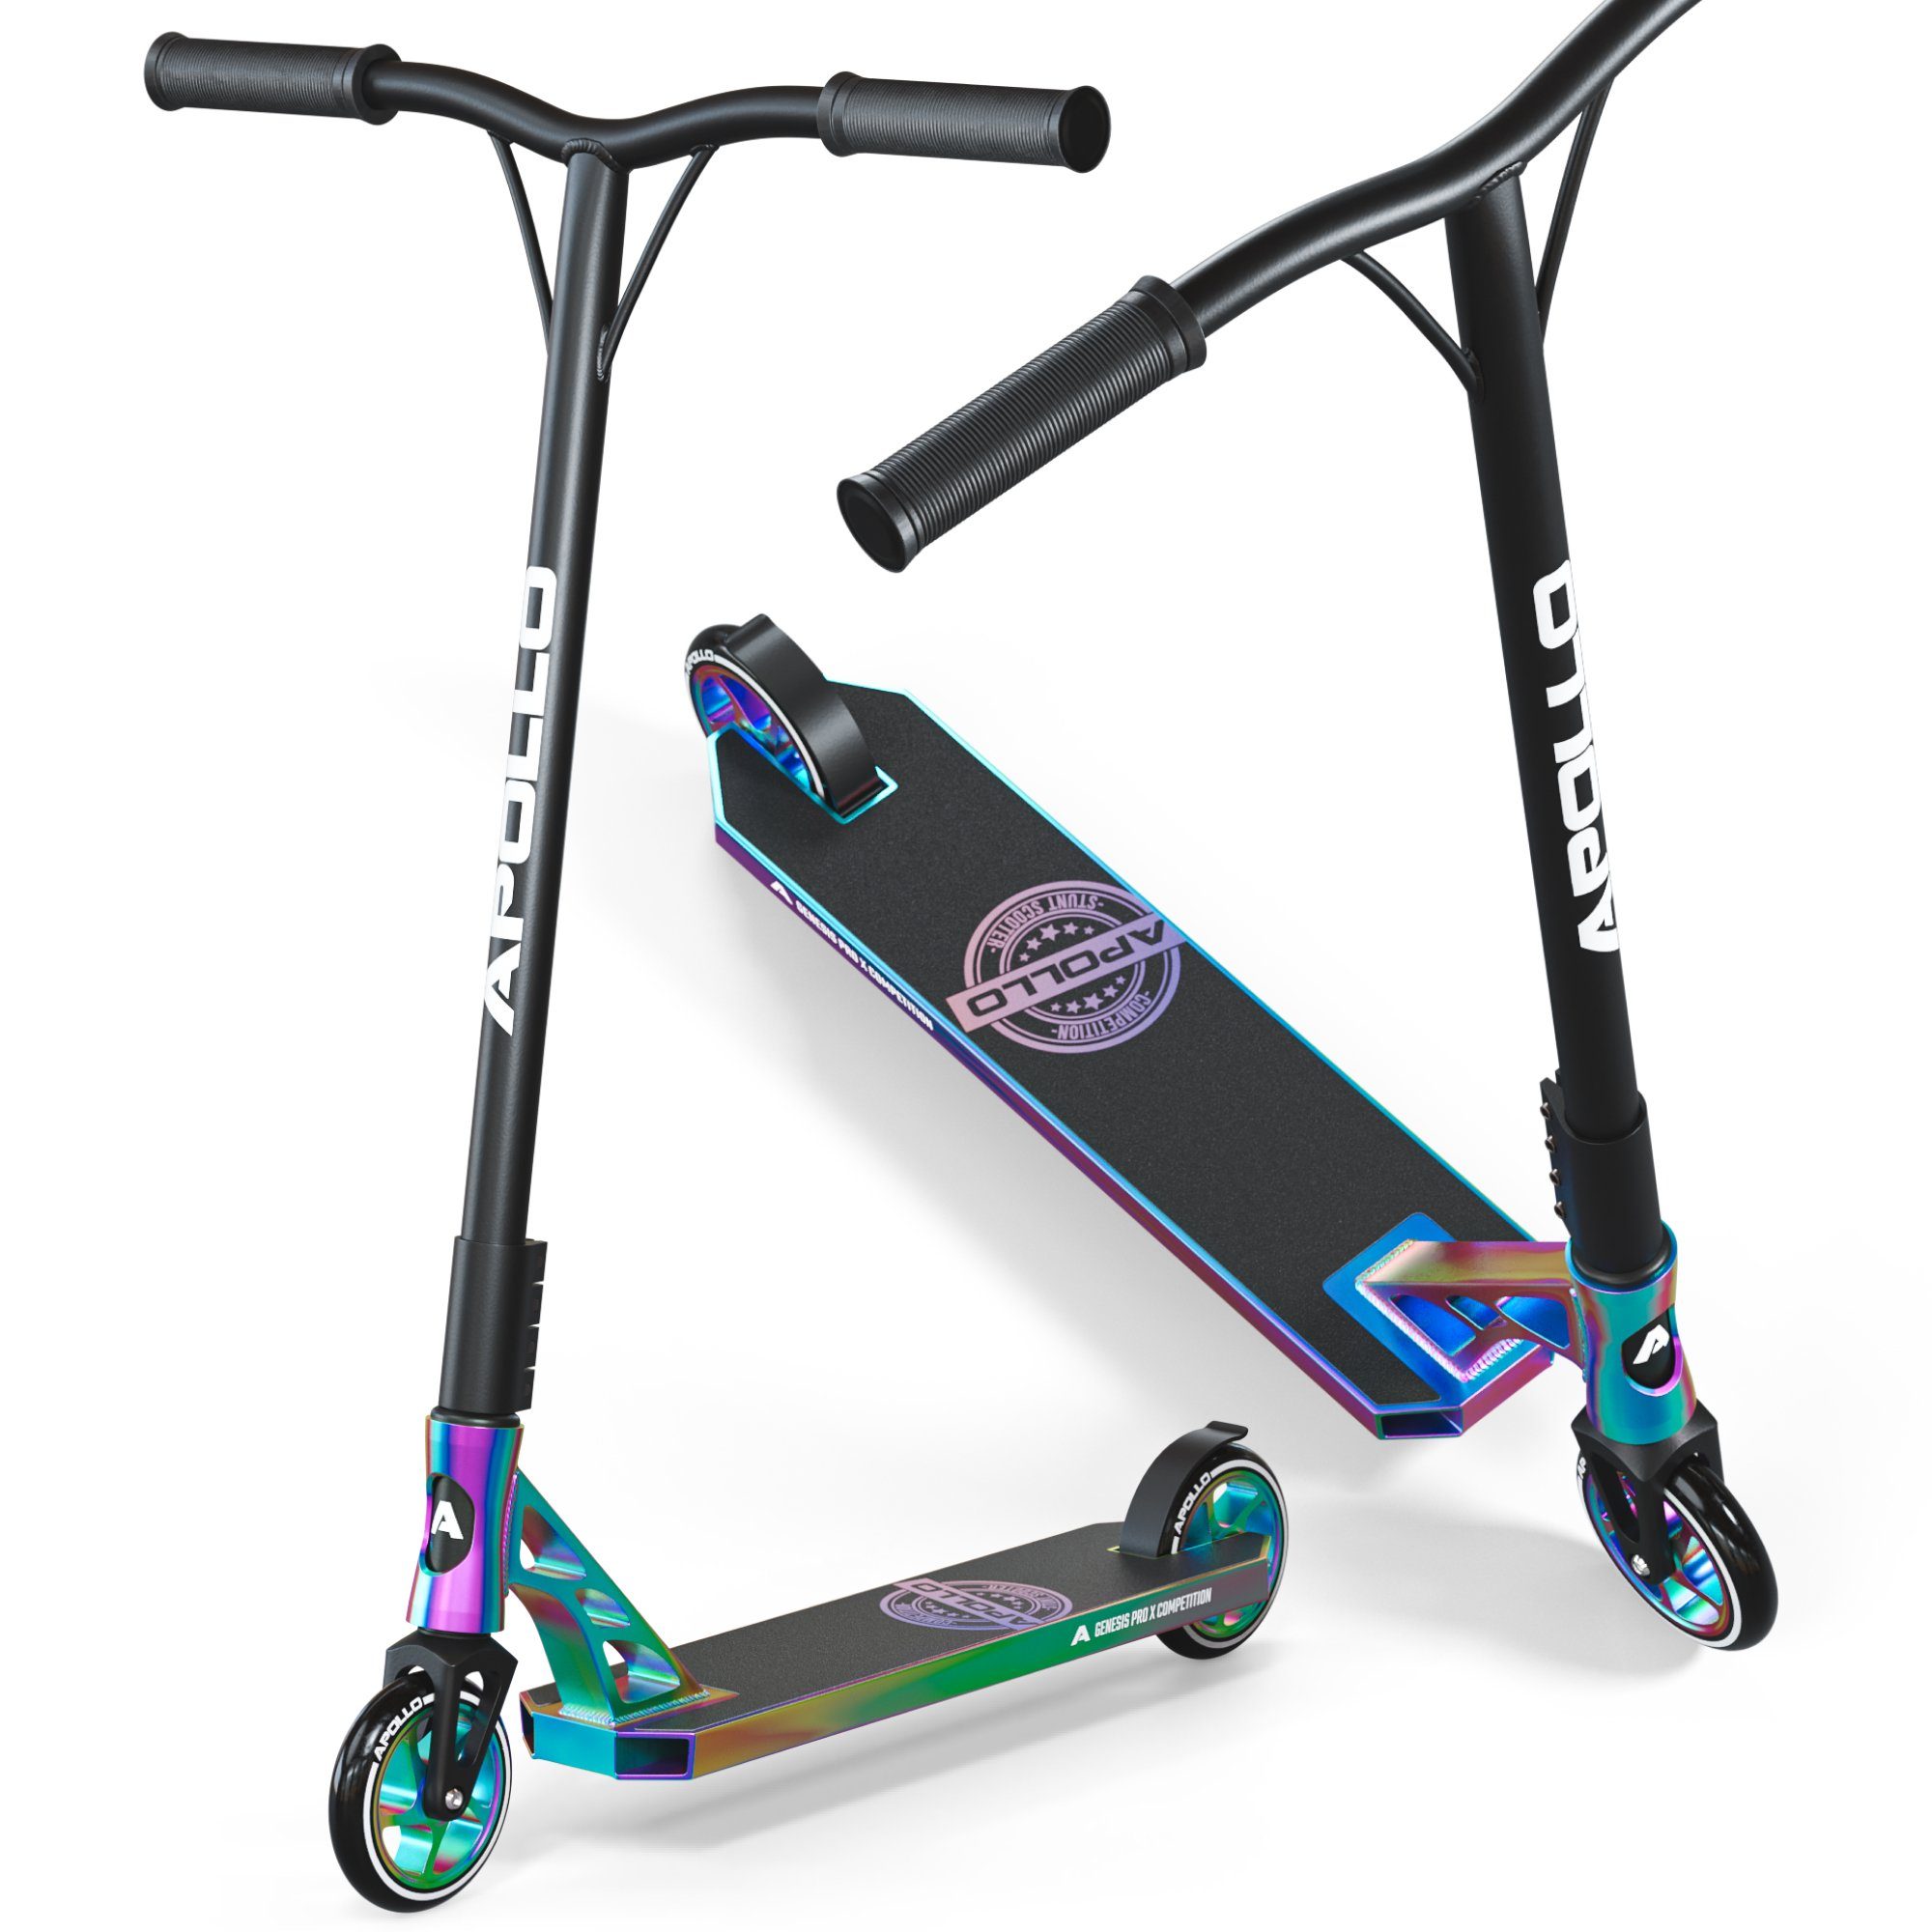 Apollo Pro High -, Genesis Stunt Stuntscooter End X Scooter Rainbow Roller Competition